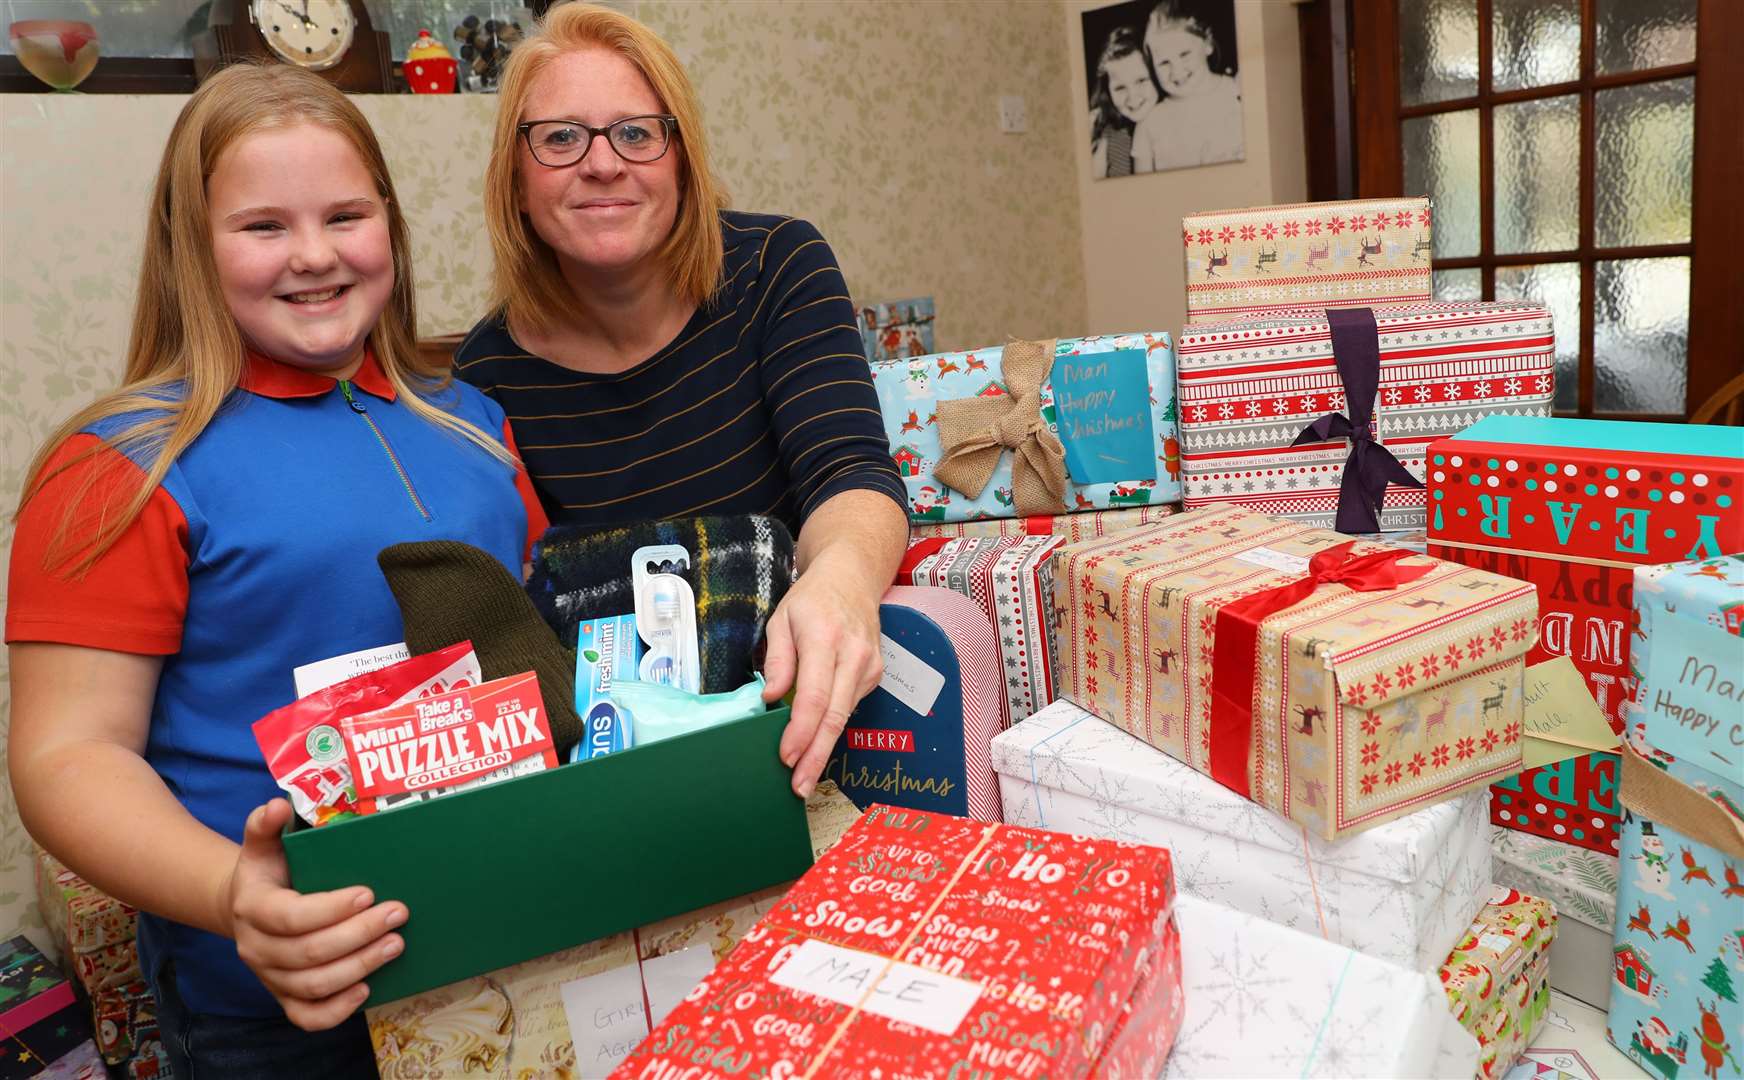 Fifi and Sarah Coccia have been collecting gift boxes for various charities